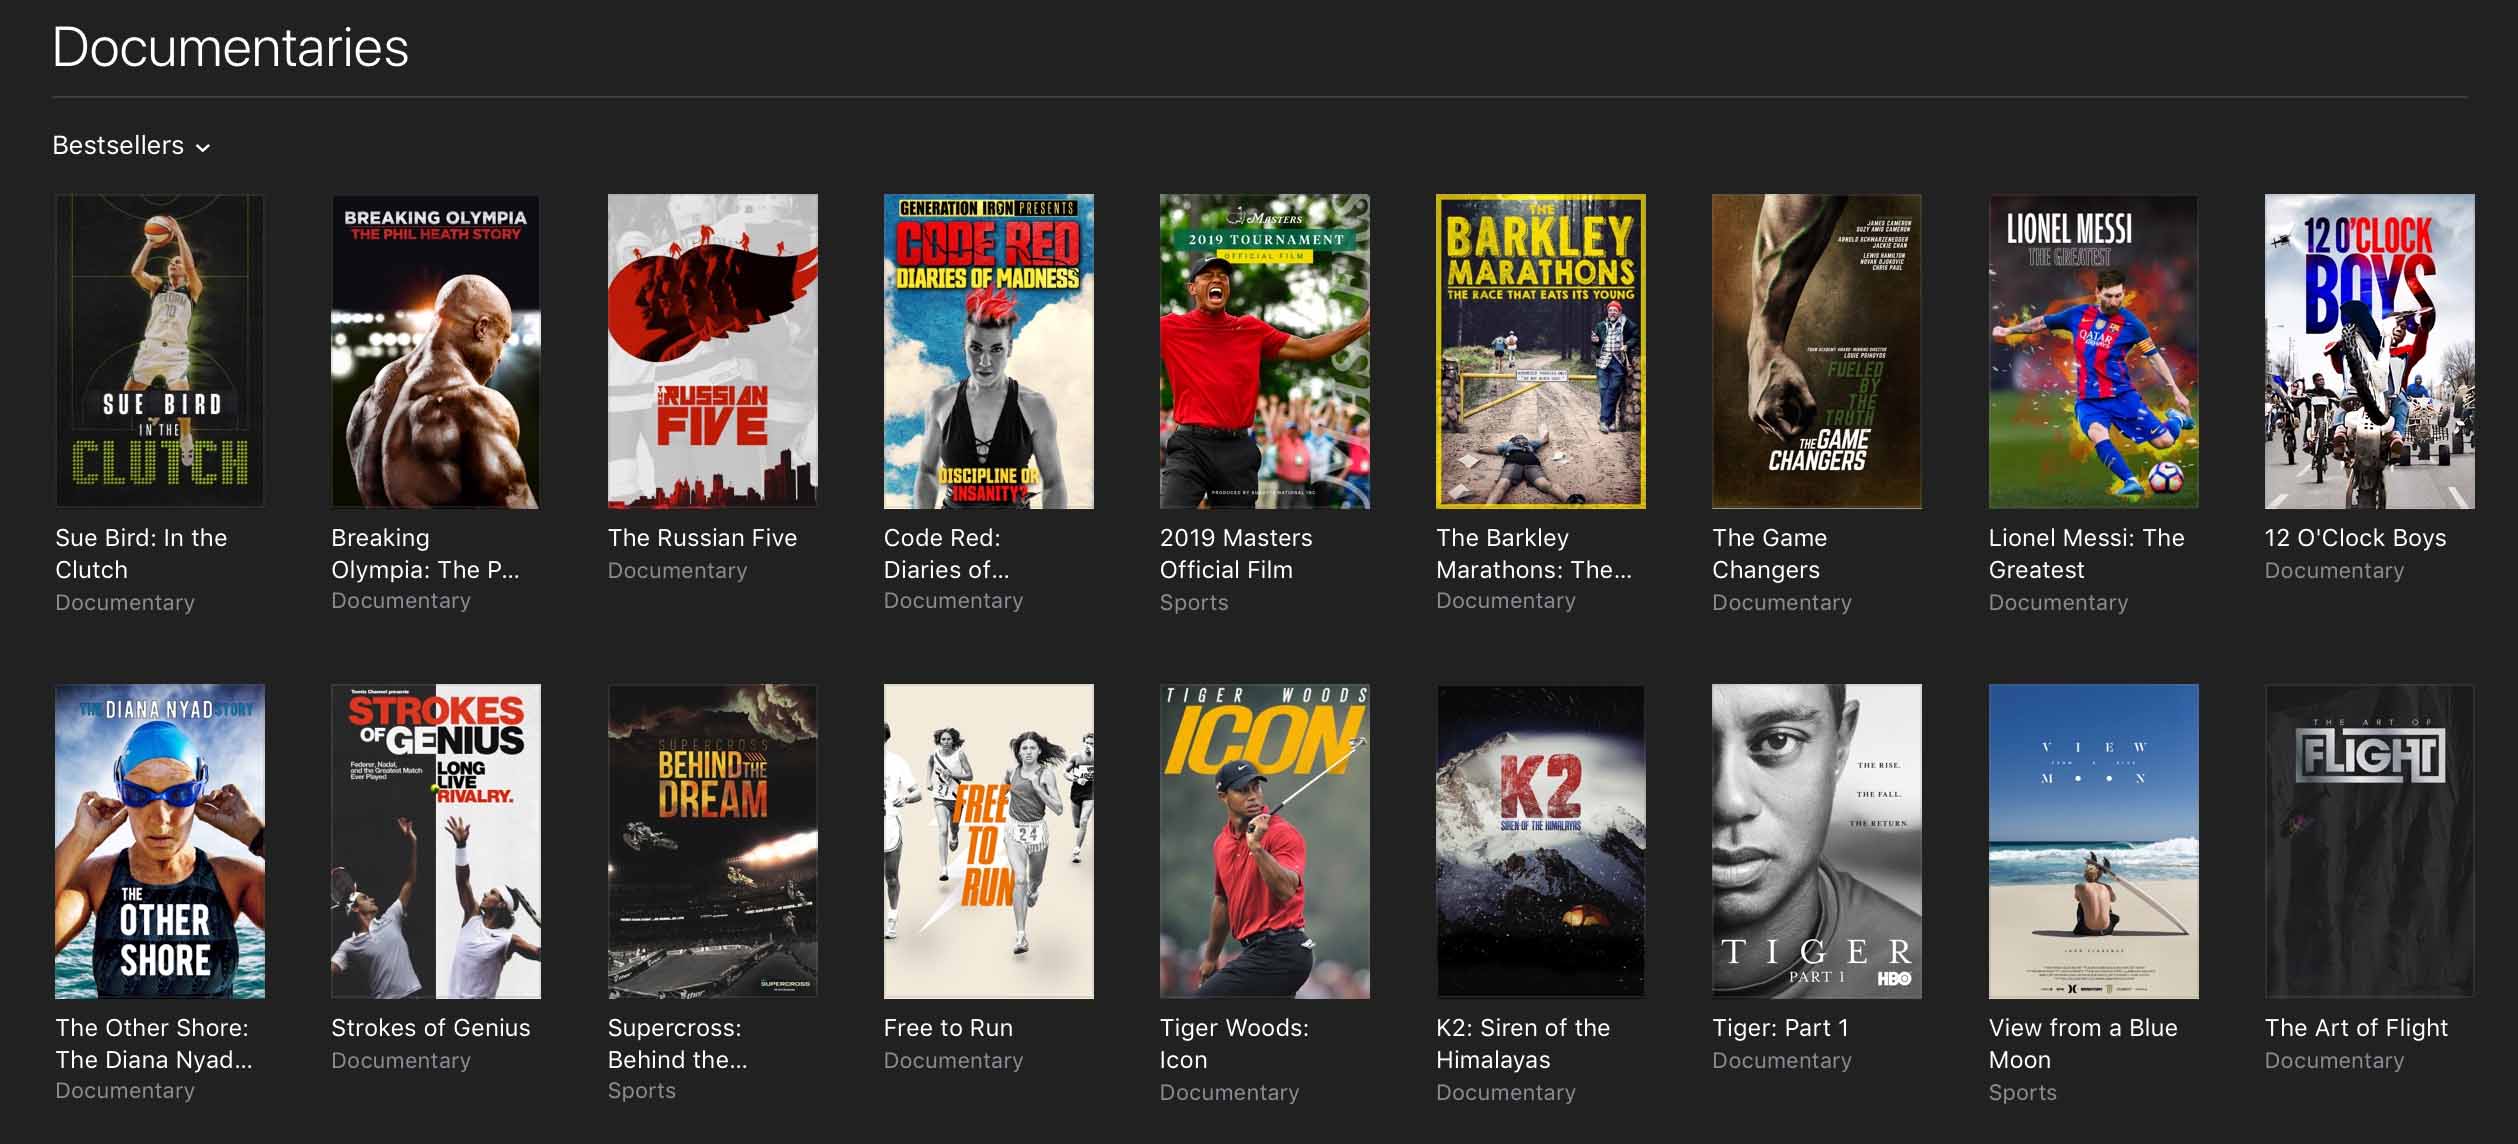 Code Red Top 5 Sports Documentary iTunes chart